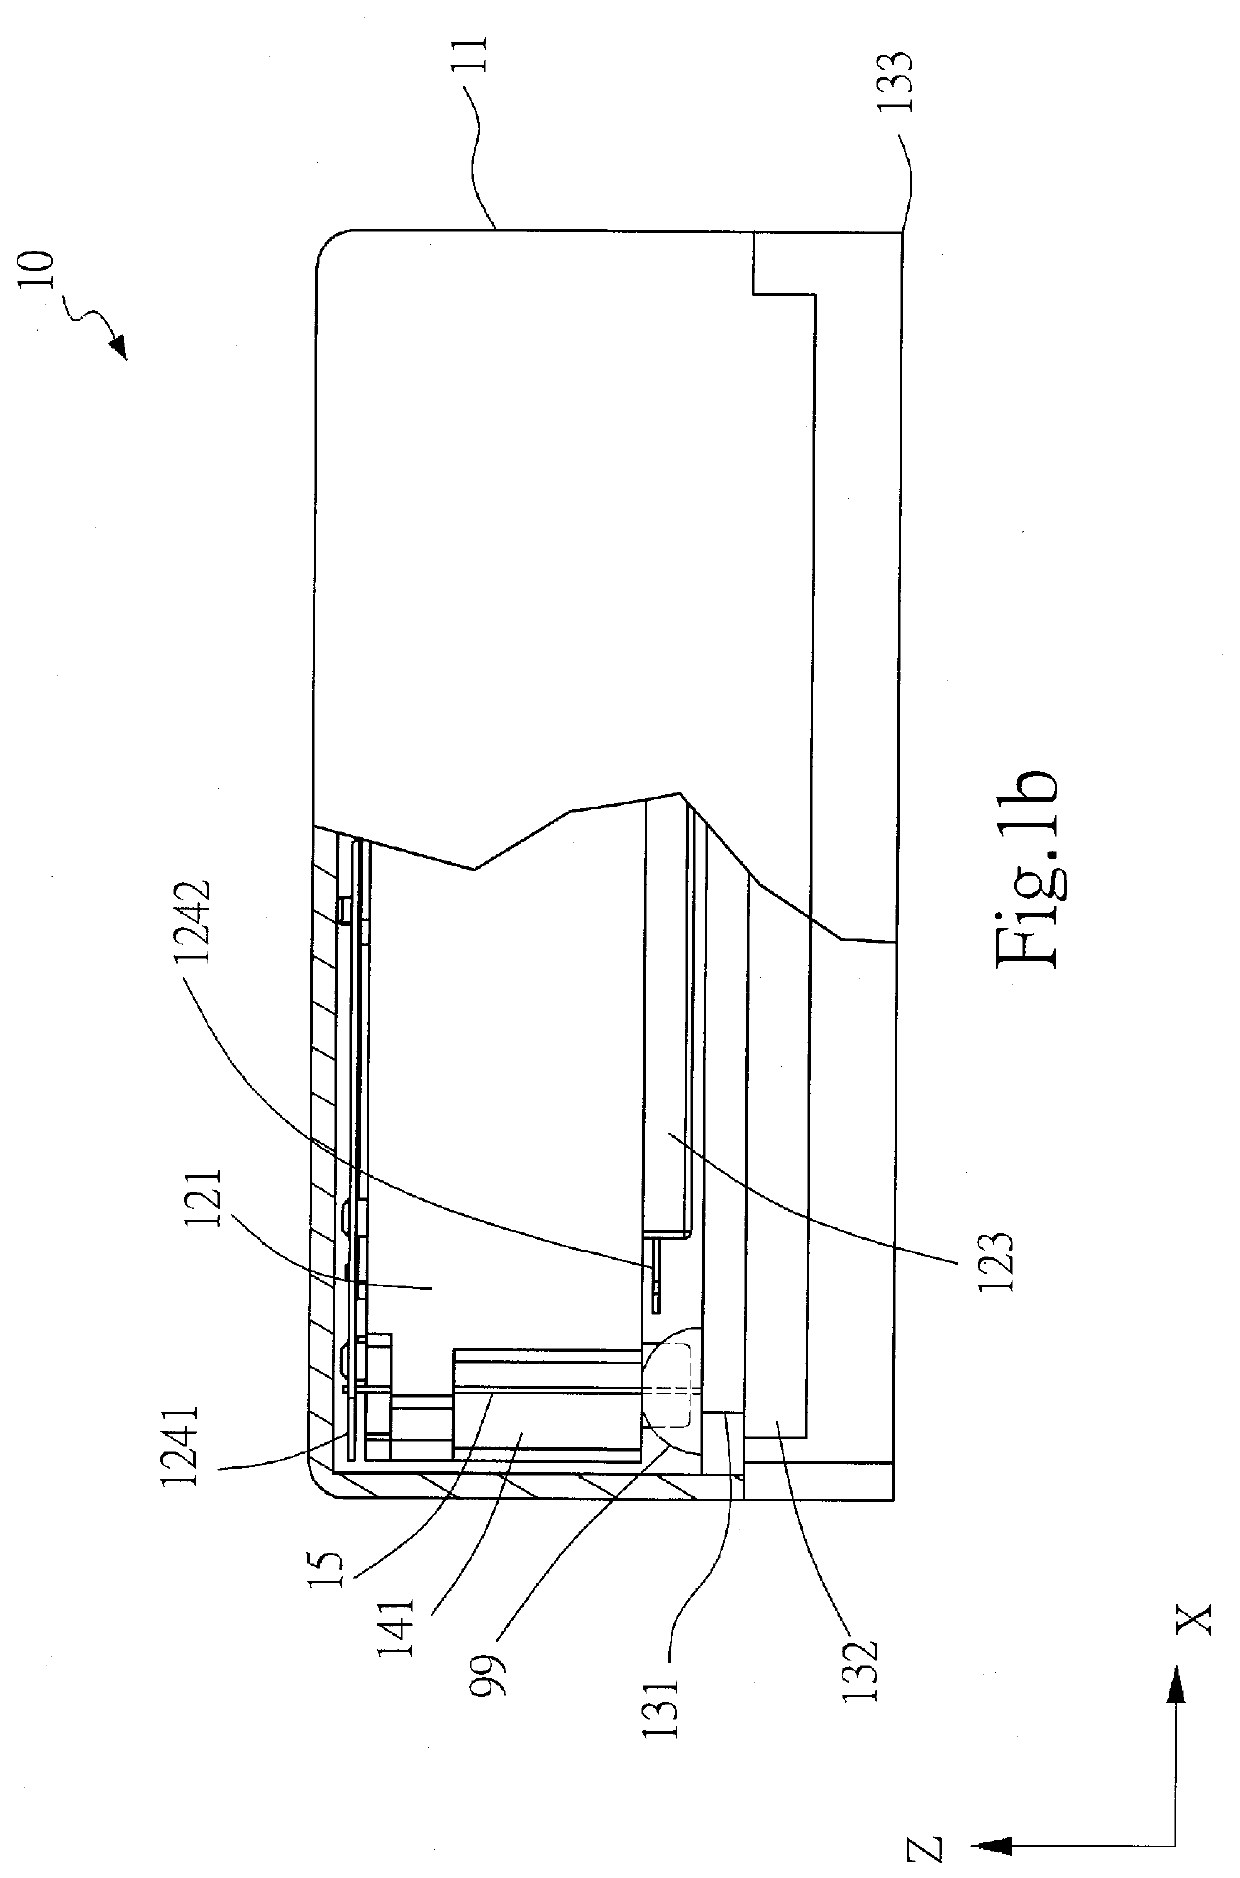 Lens Driving Device With Optical Image Stabilization System